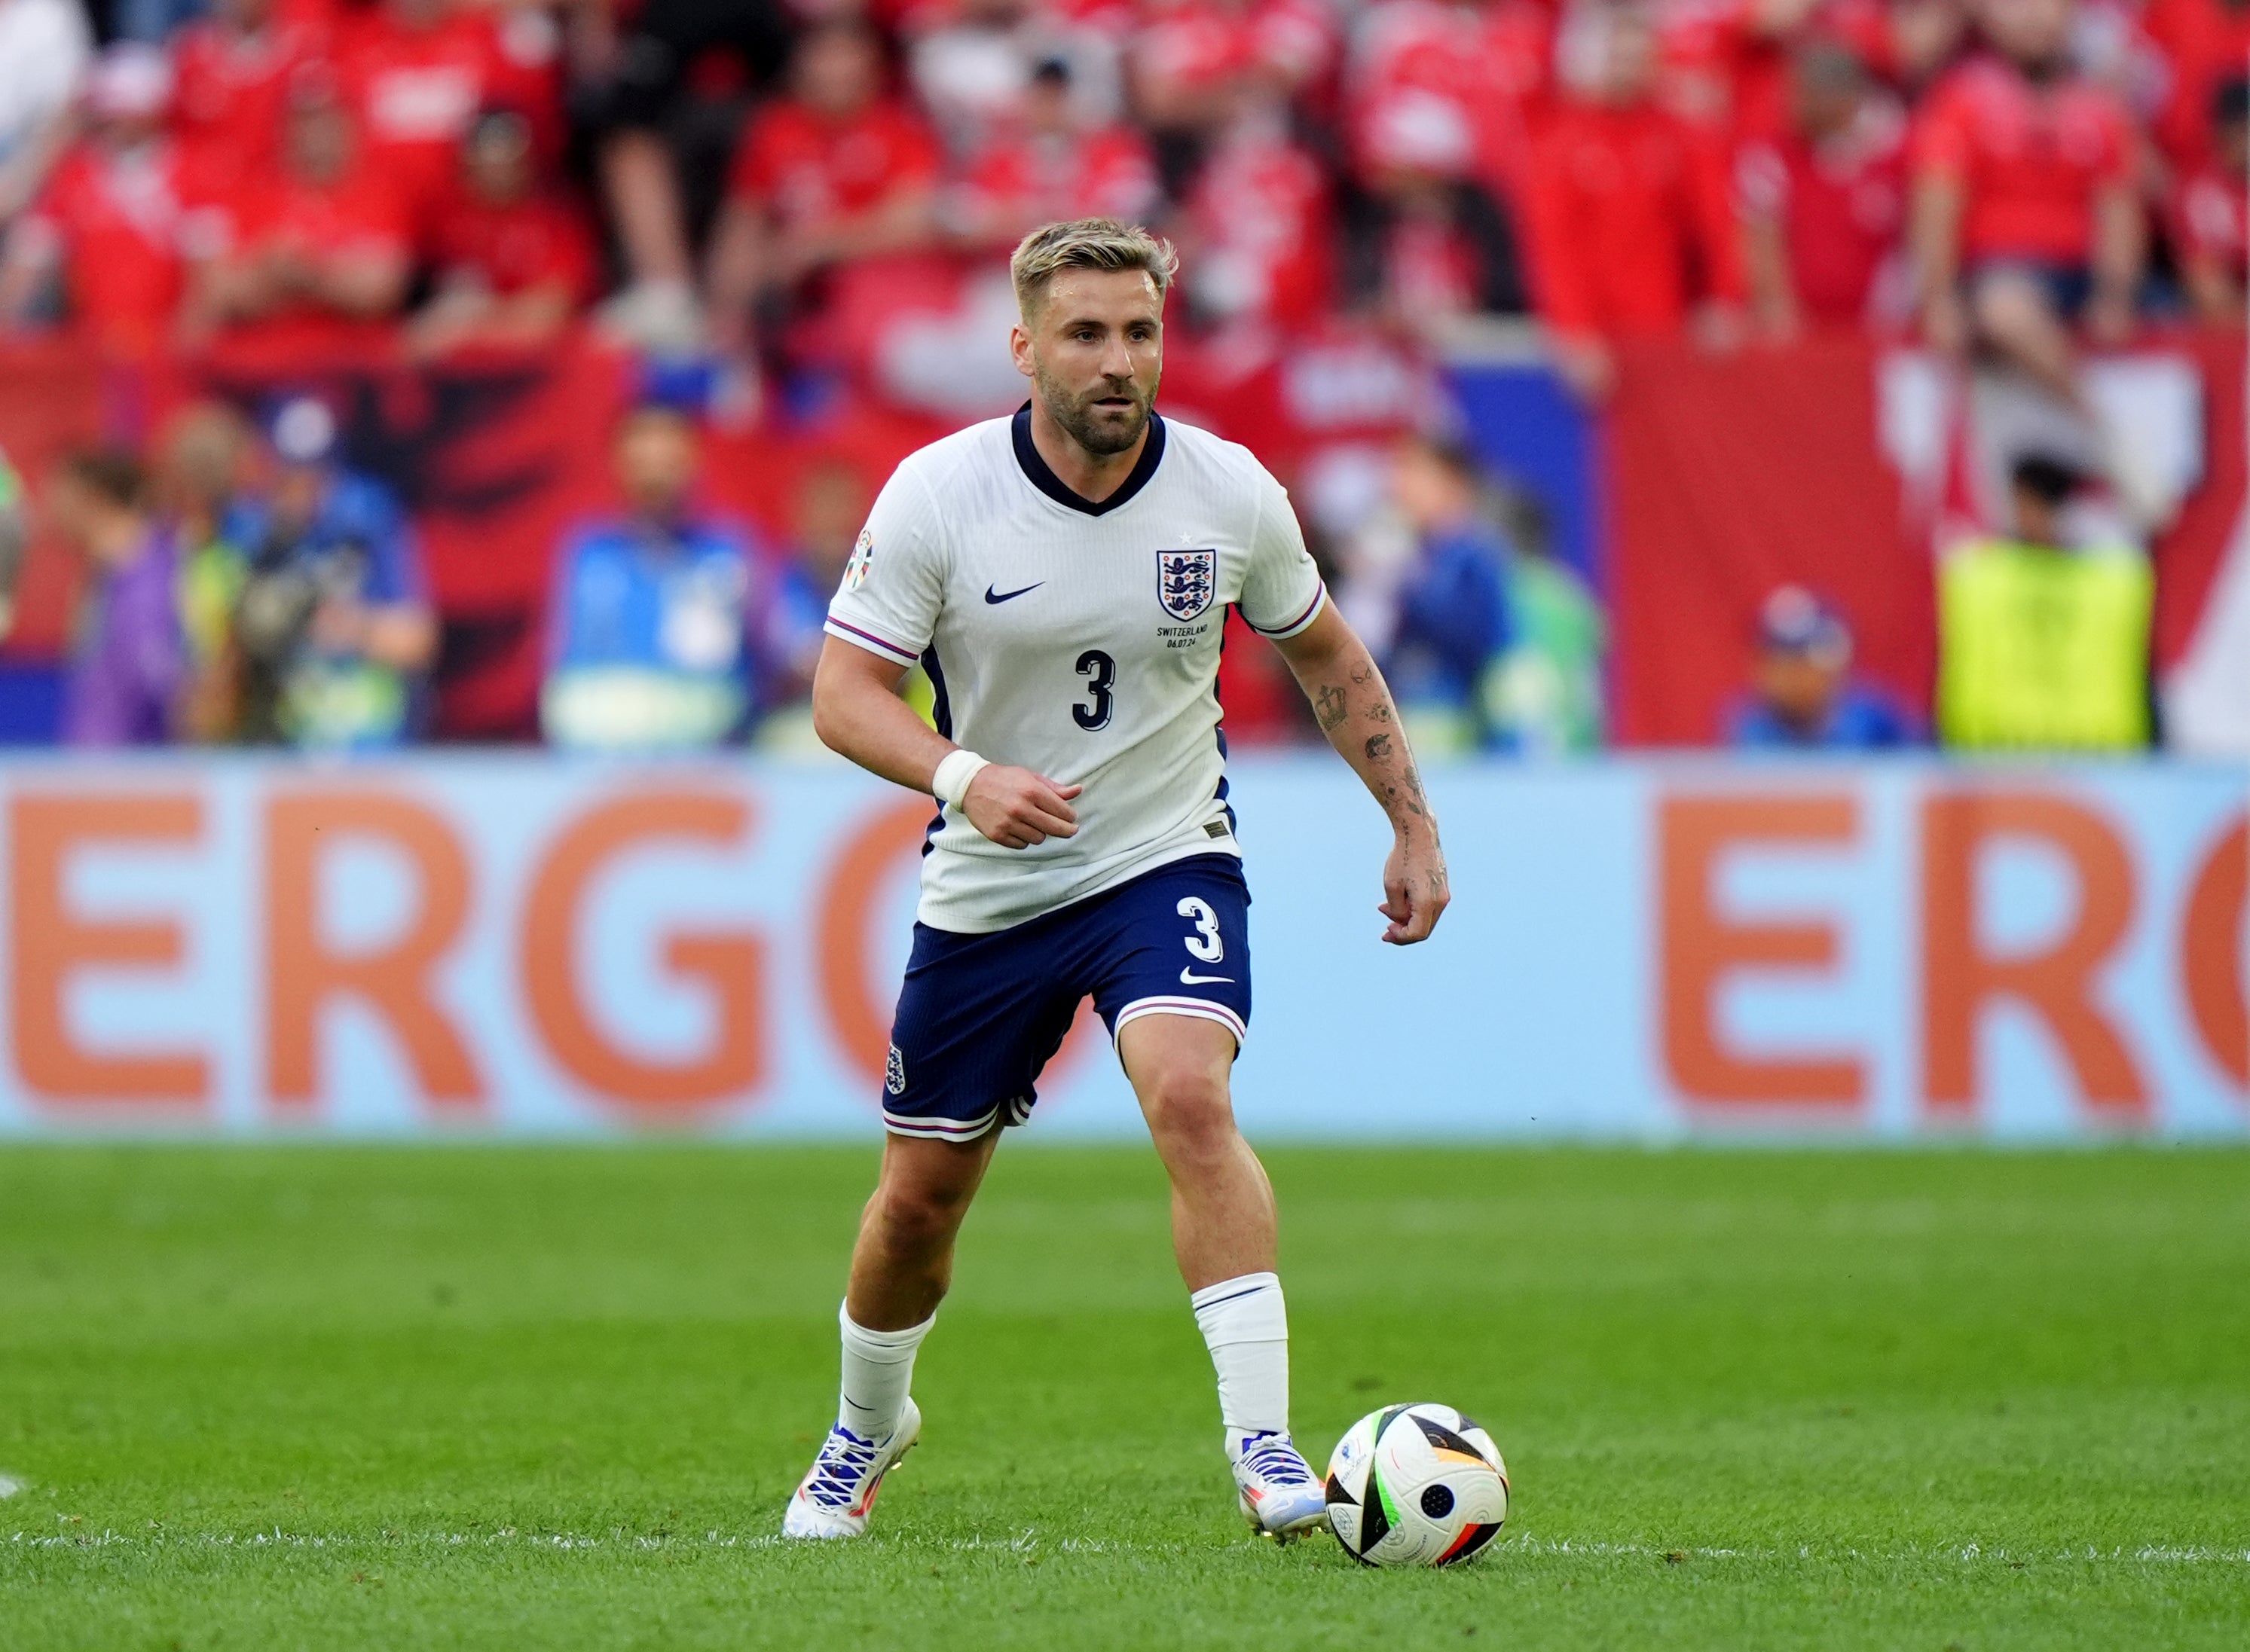 Luke Shaw is fit after sitting the first few games out and finally getting some game time against the Swiss